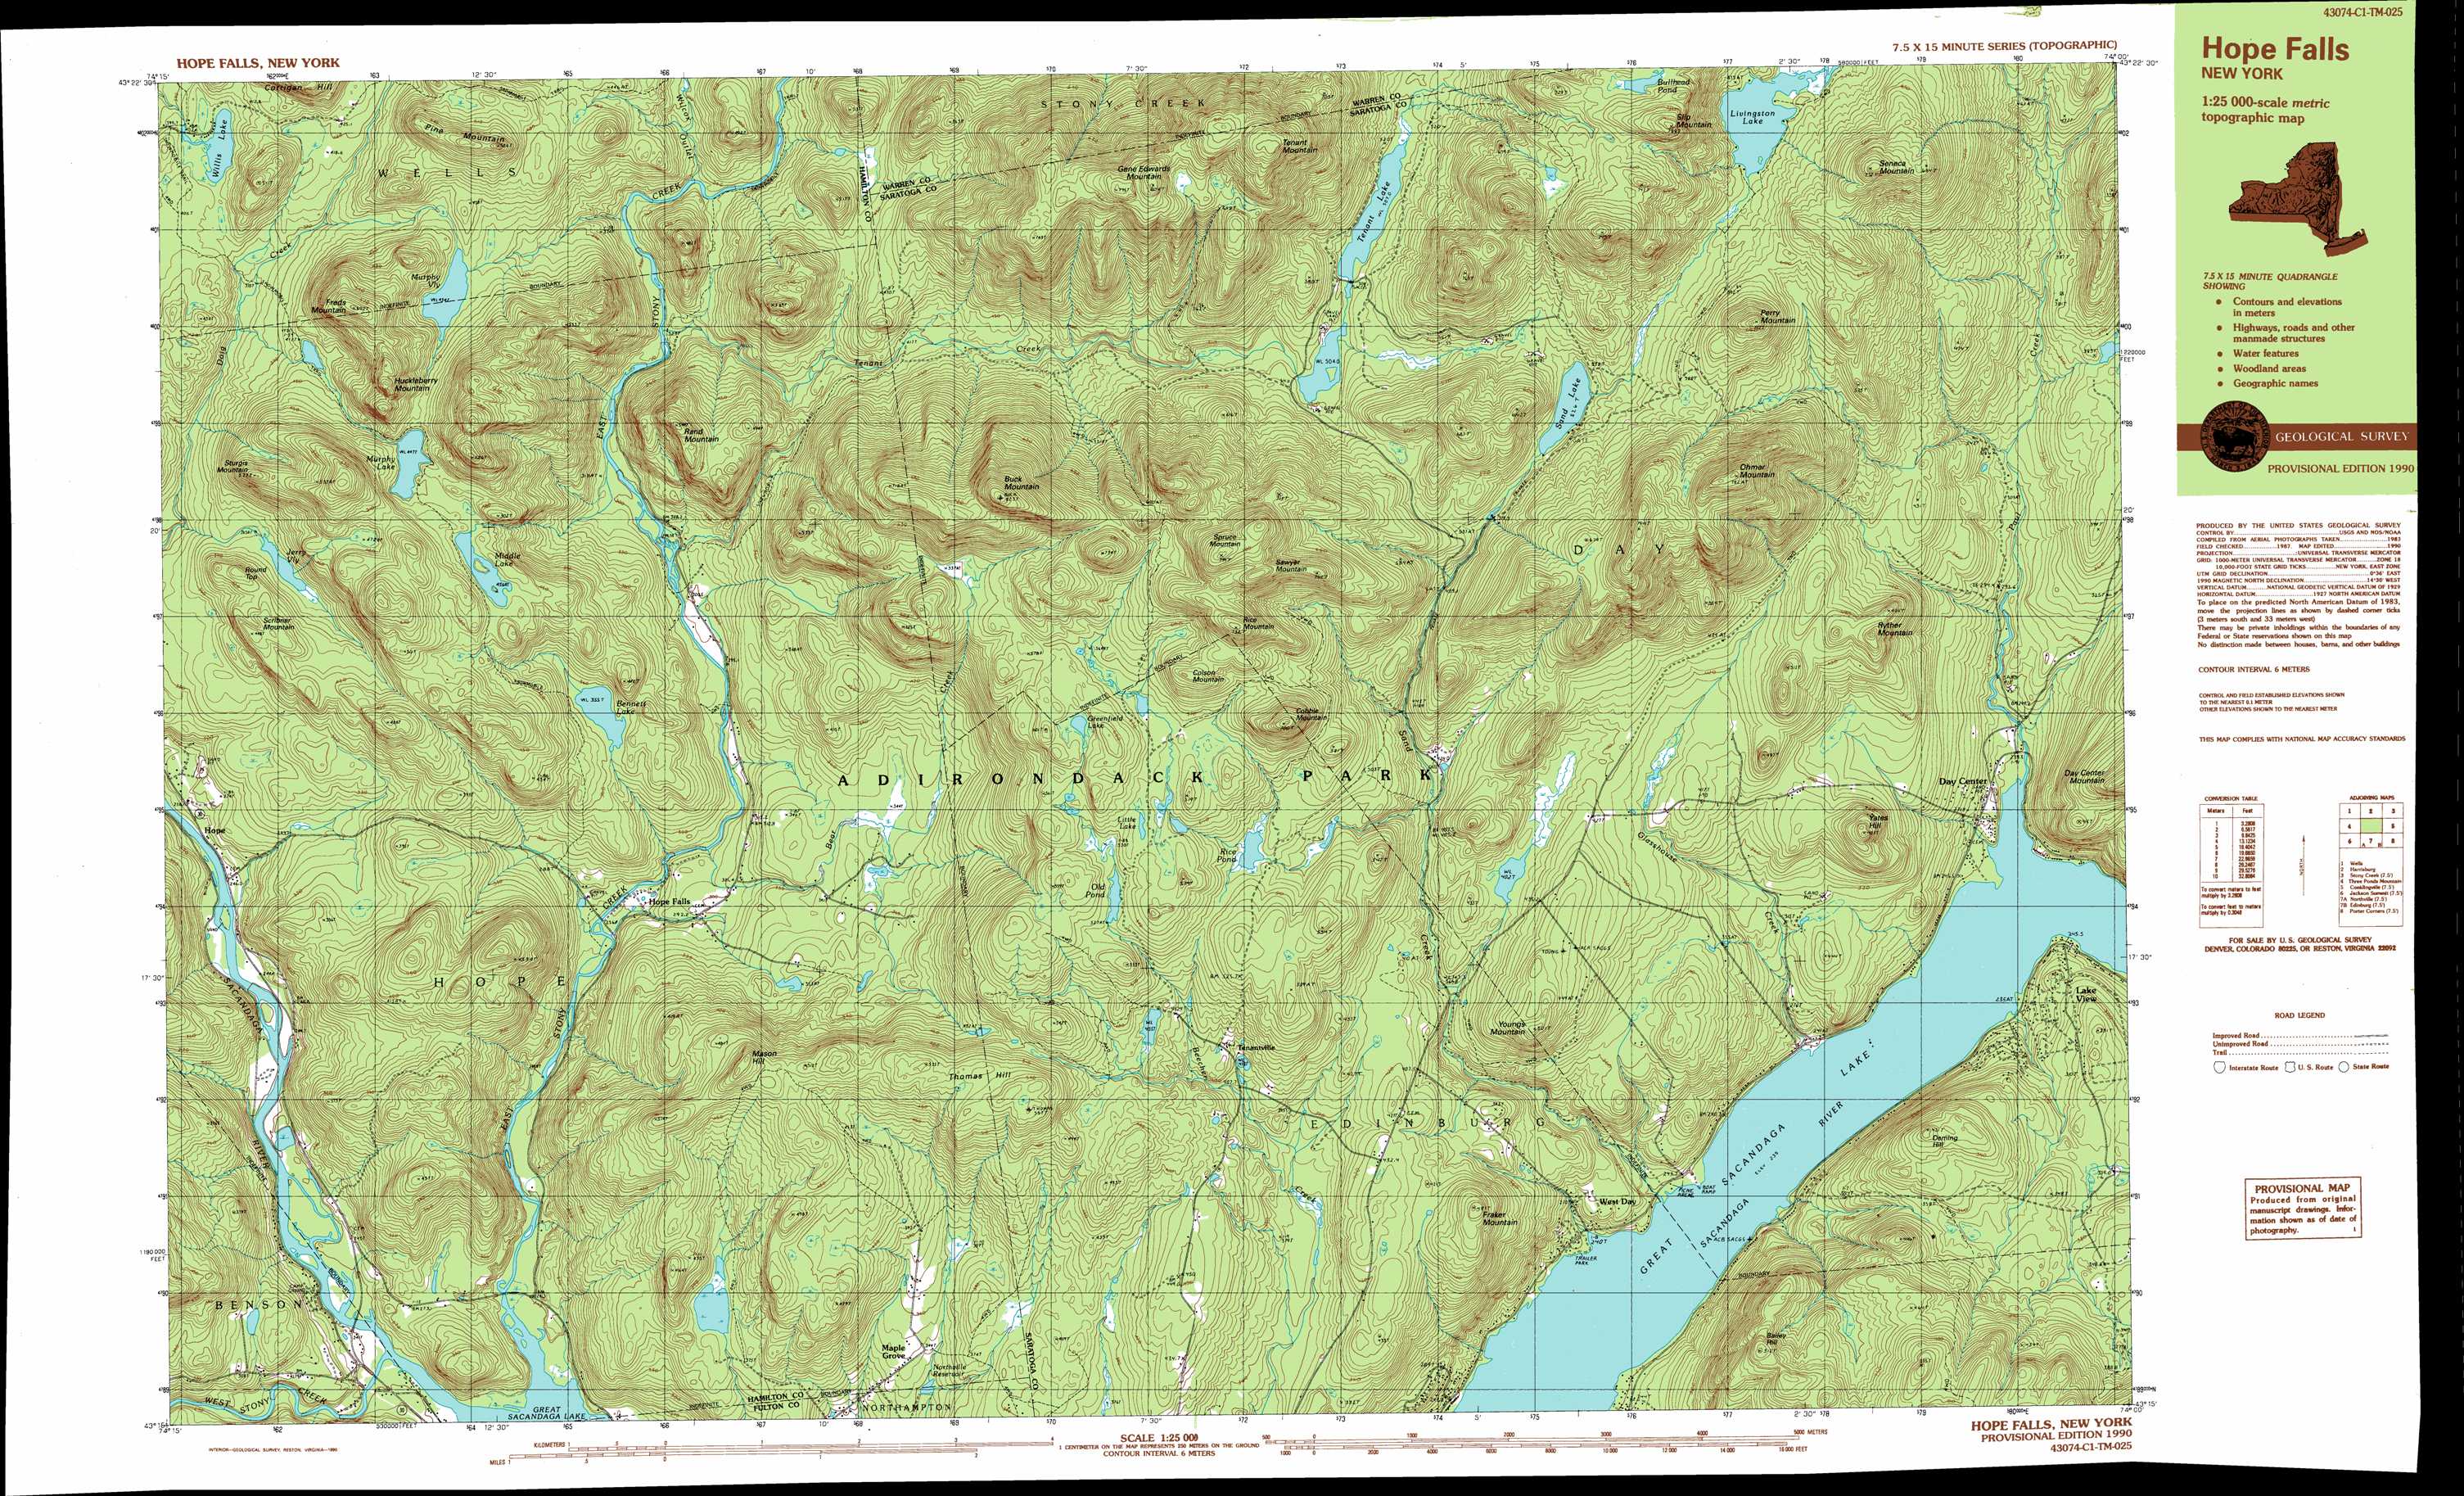 Rensselaer County New York USGS Topographic Maps on CD